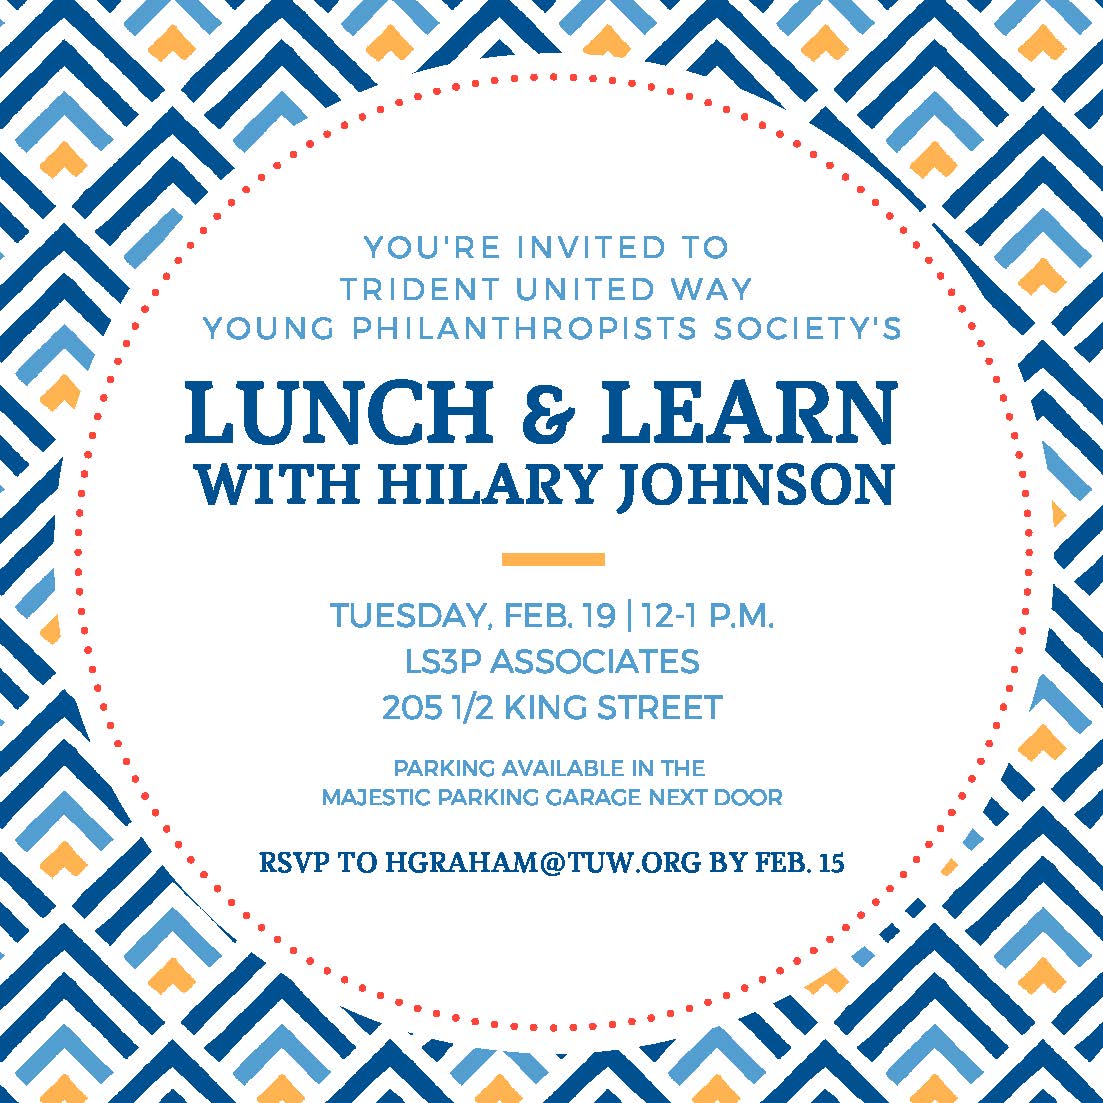 Young Philanthropists Society Lunch invitation